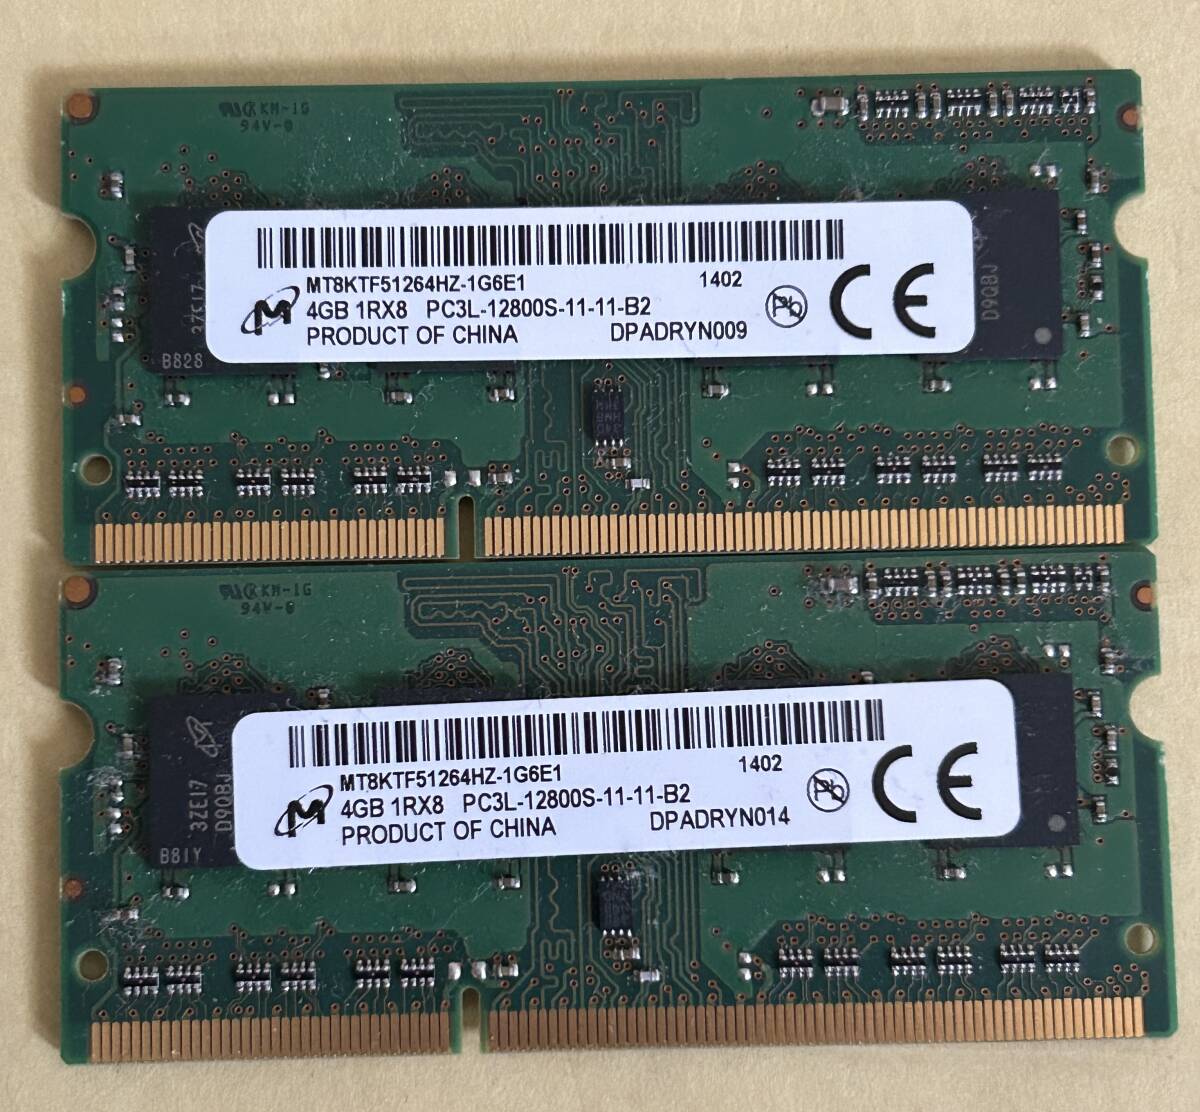 Micron マイクロン SO-DIMM 204pin DDR3L PC3L-12800S 4GB×2枚(8GB) 1.35V低電圧対応 1.5V対応ノートパソコン用 ①の画像1